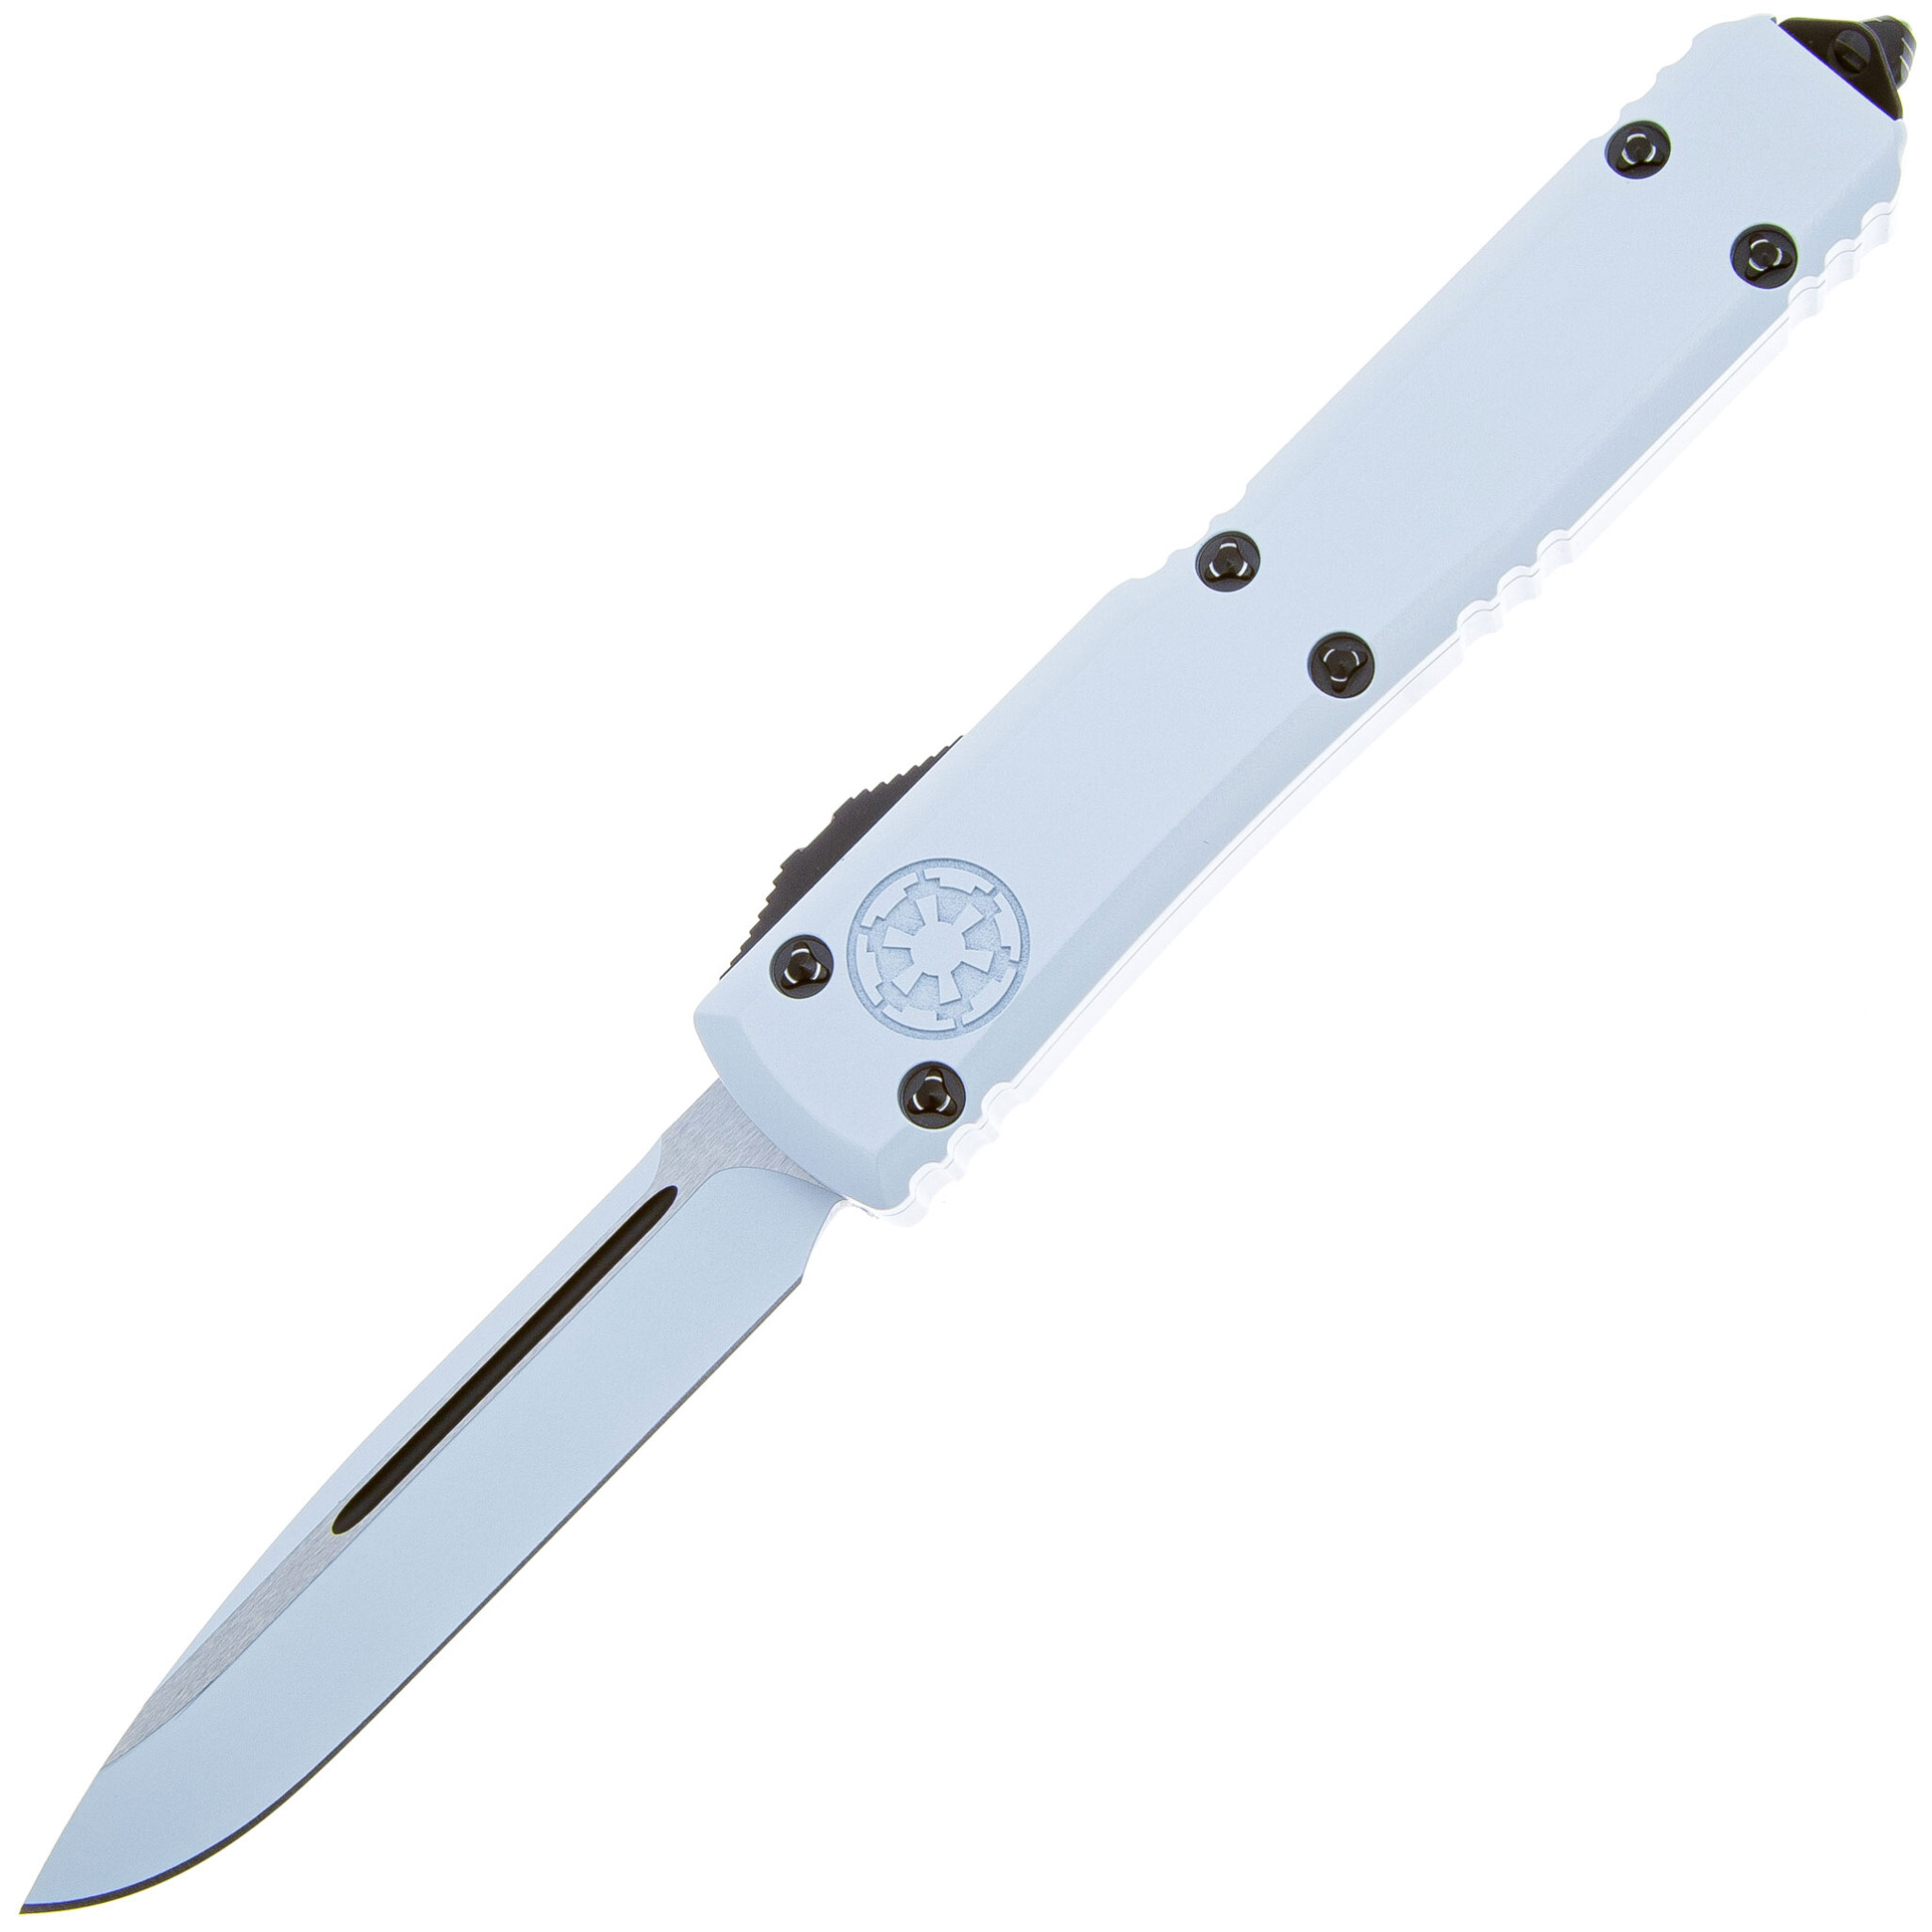    Microtech Storm Trooper,  M390,  